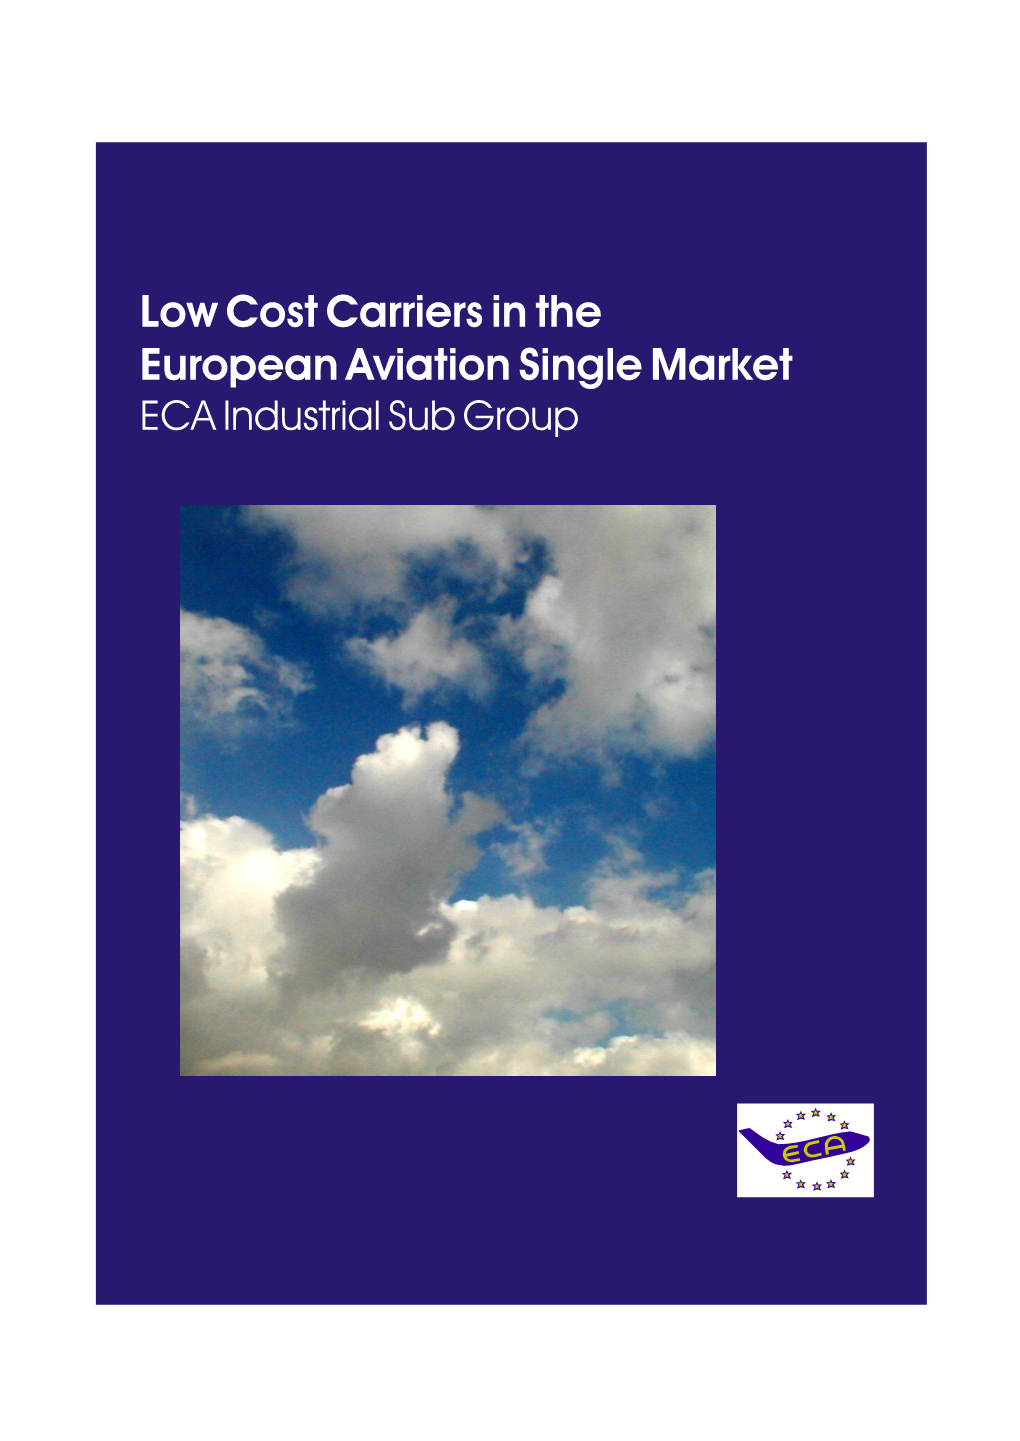 Low Cost Carriers in the European Aviation Single Market ECA Industrial Sub Group